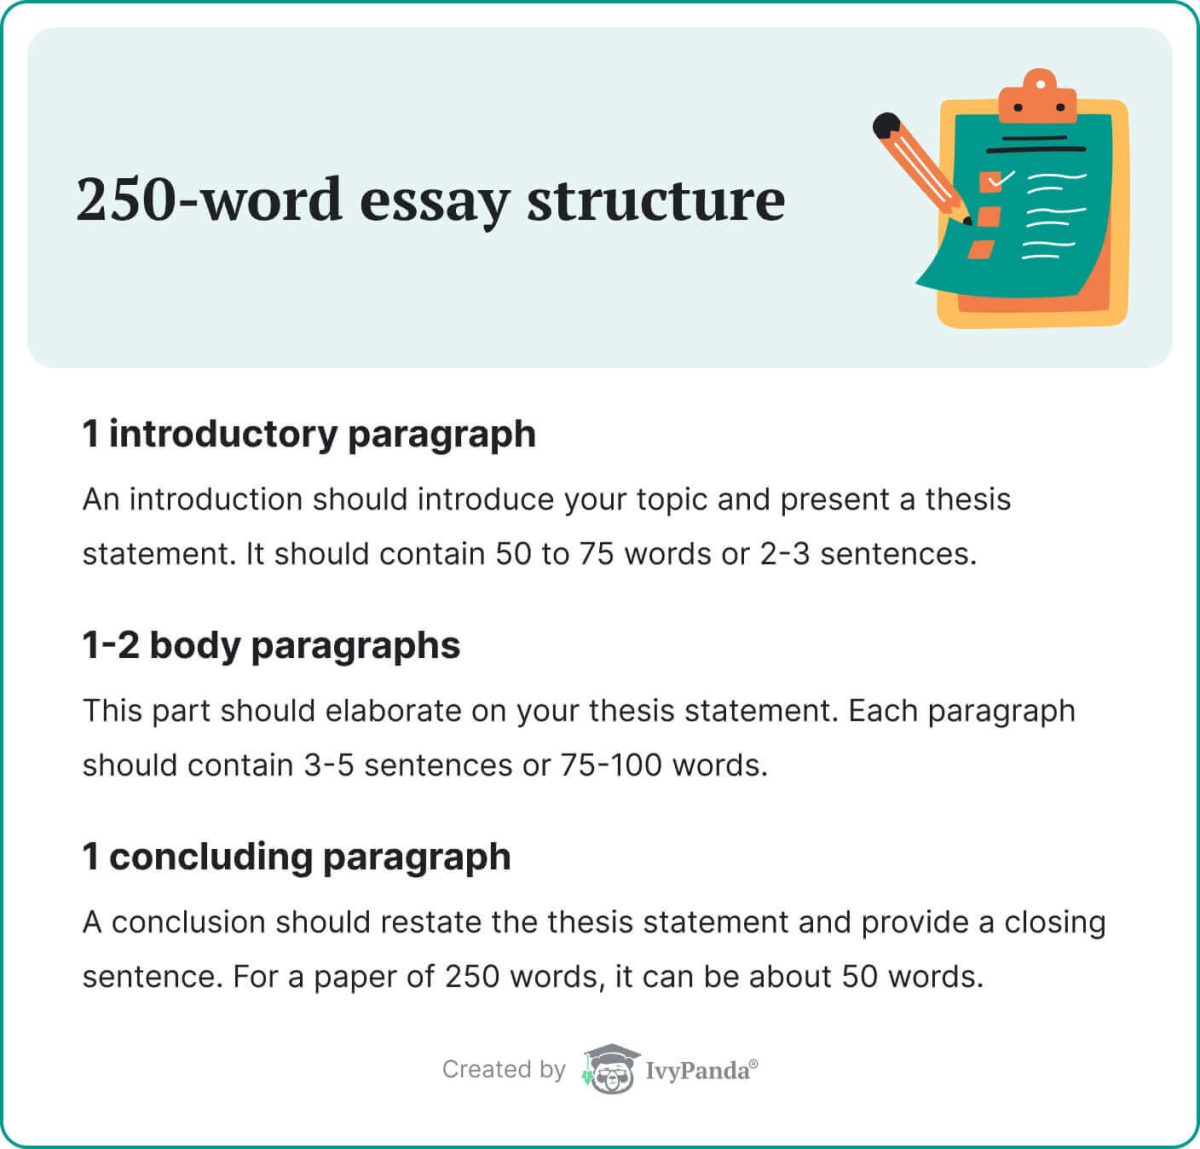 This image shows the 250-word essay structure.